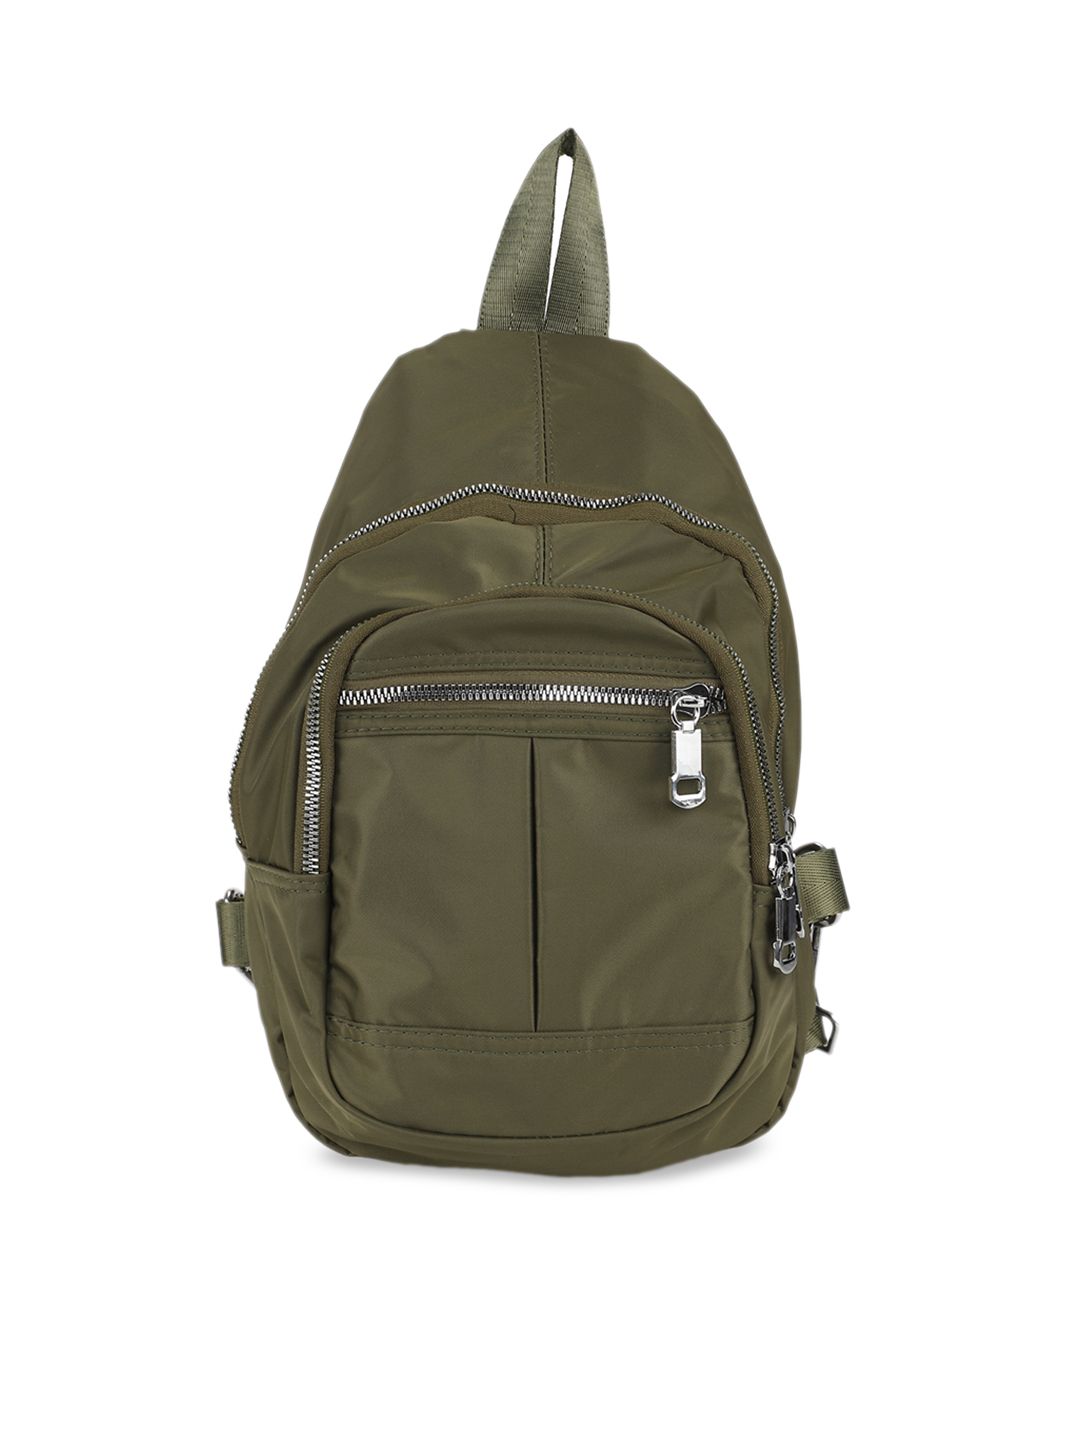 People Women Olive Green Solid Backpack Price in India